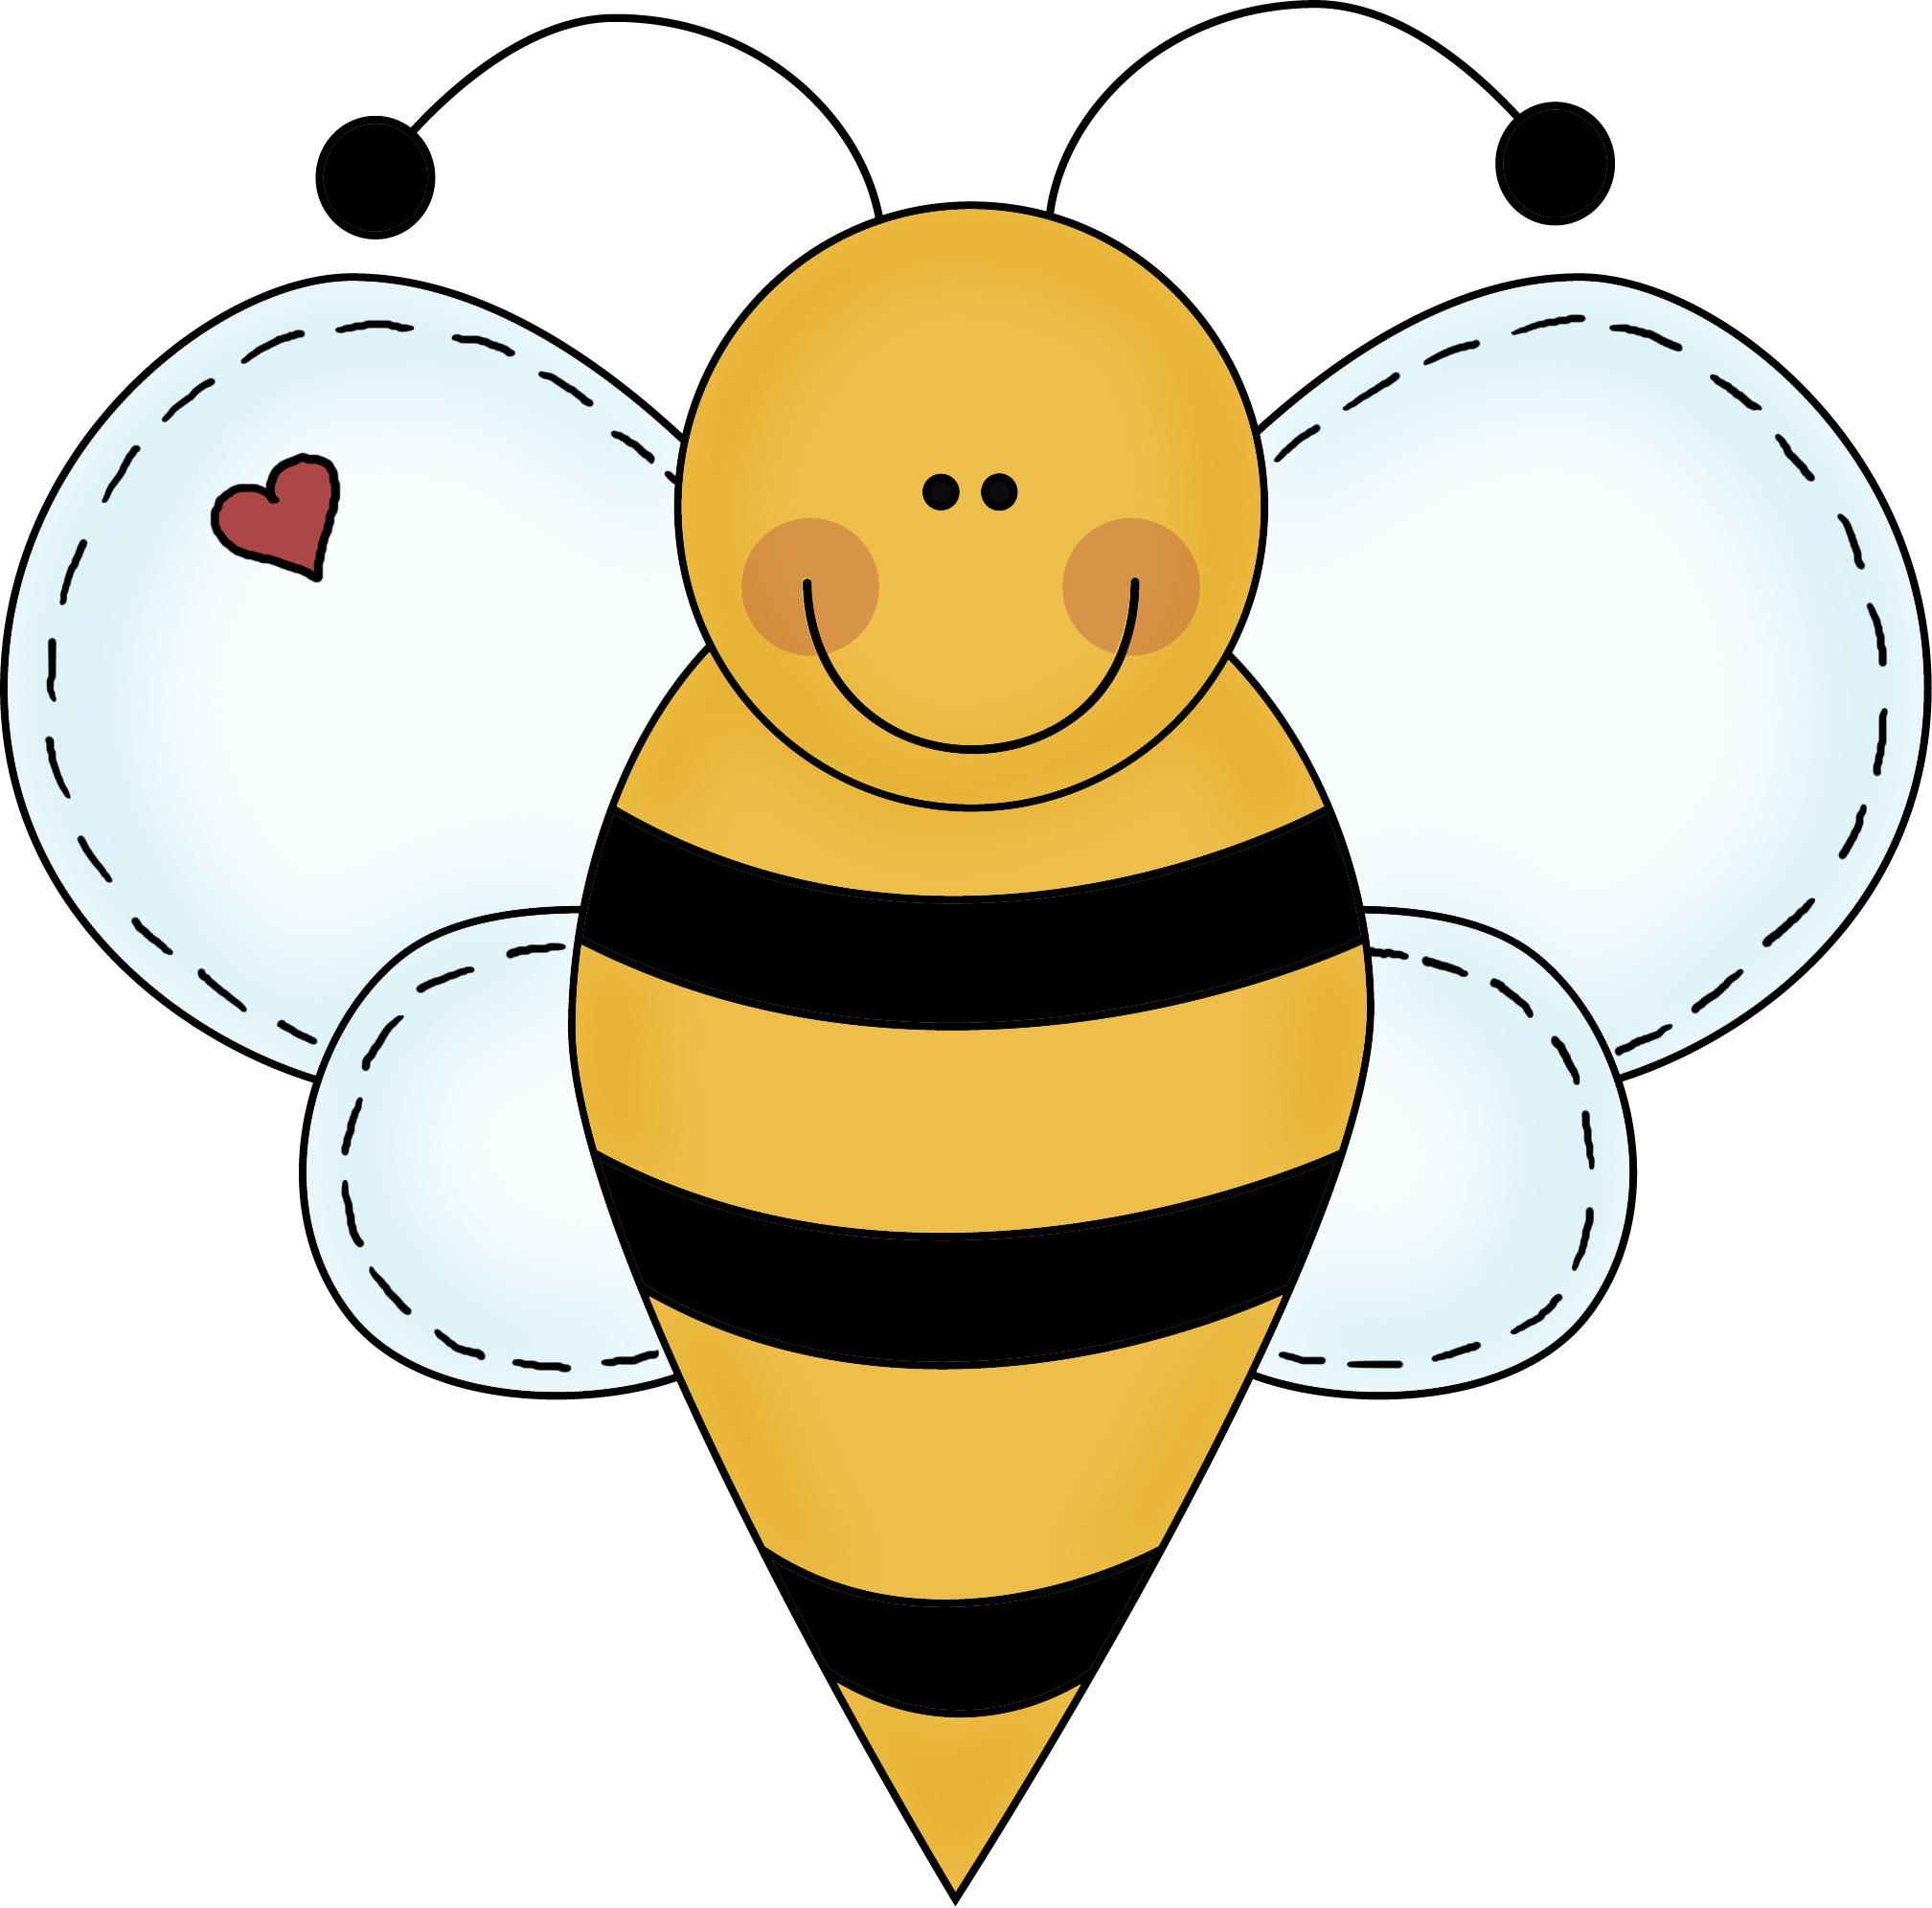 spelling bee clip art images - photo #11